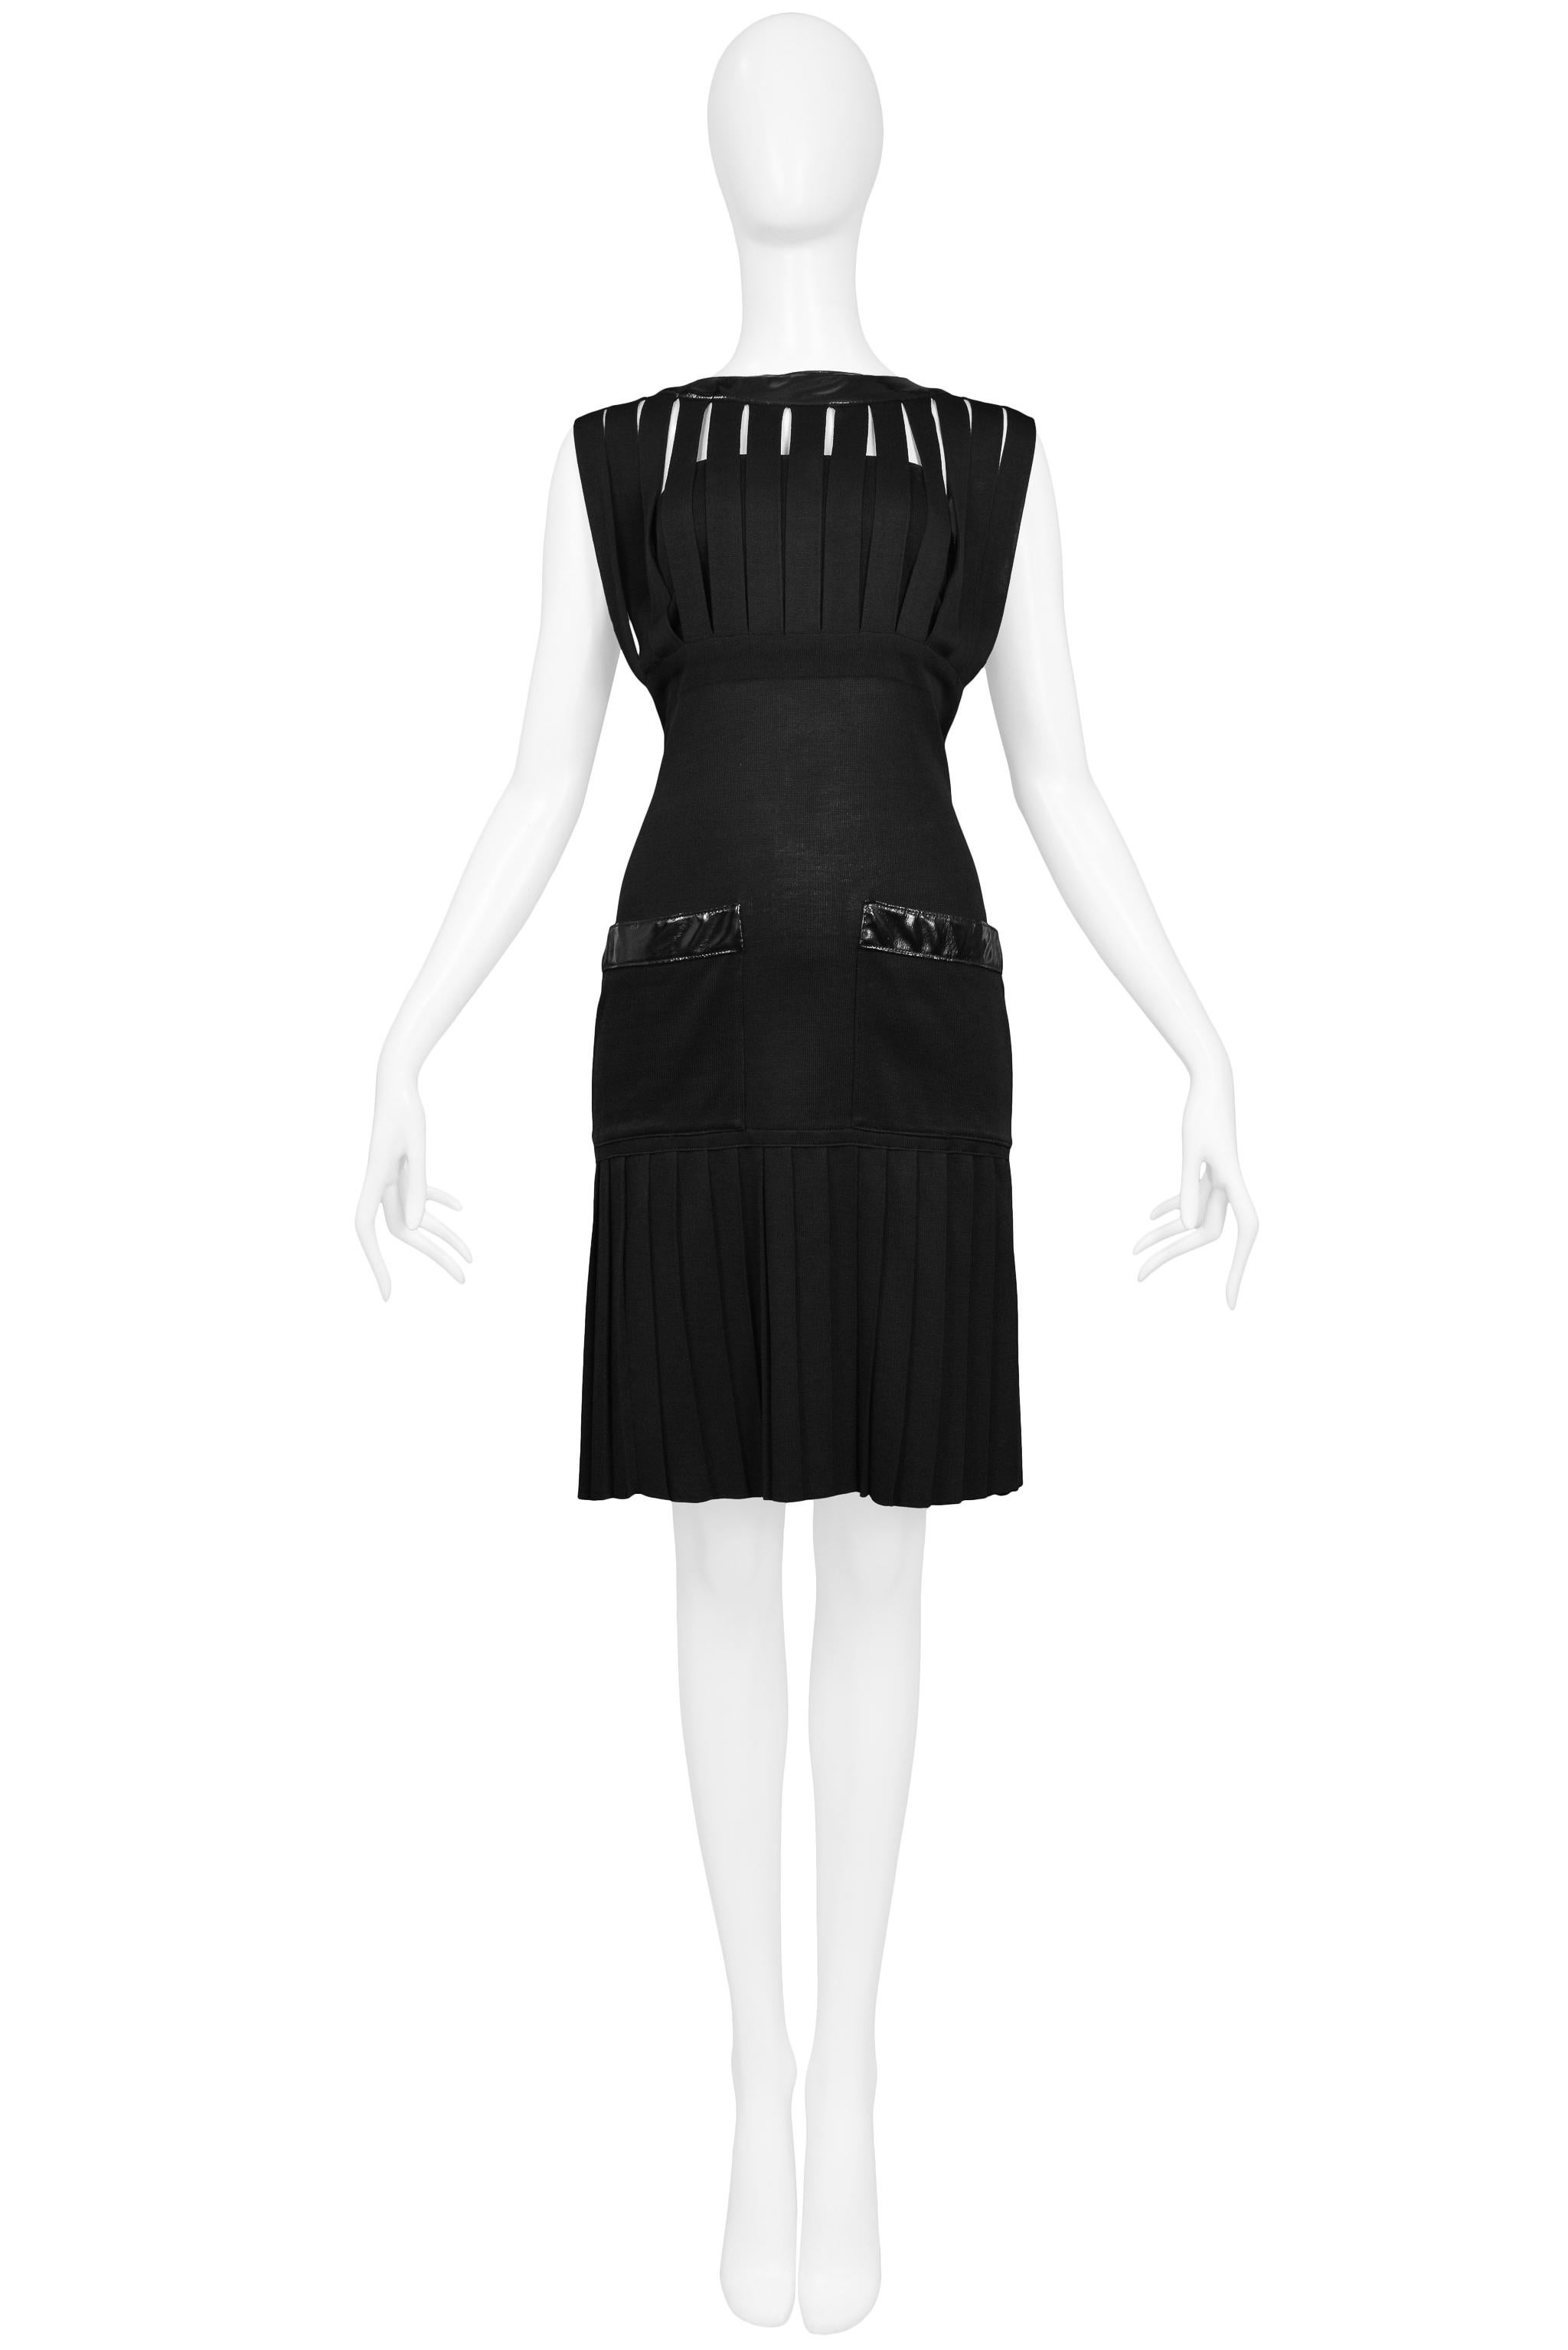 Resurrection Vintage is excited to offer a vintage Chanel black viscose knit cocktail cage dress featuring vertical bands, black wetlook trim, black and gold 